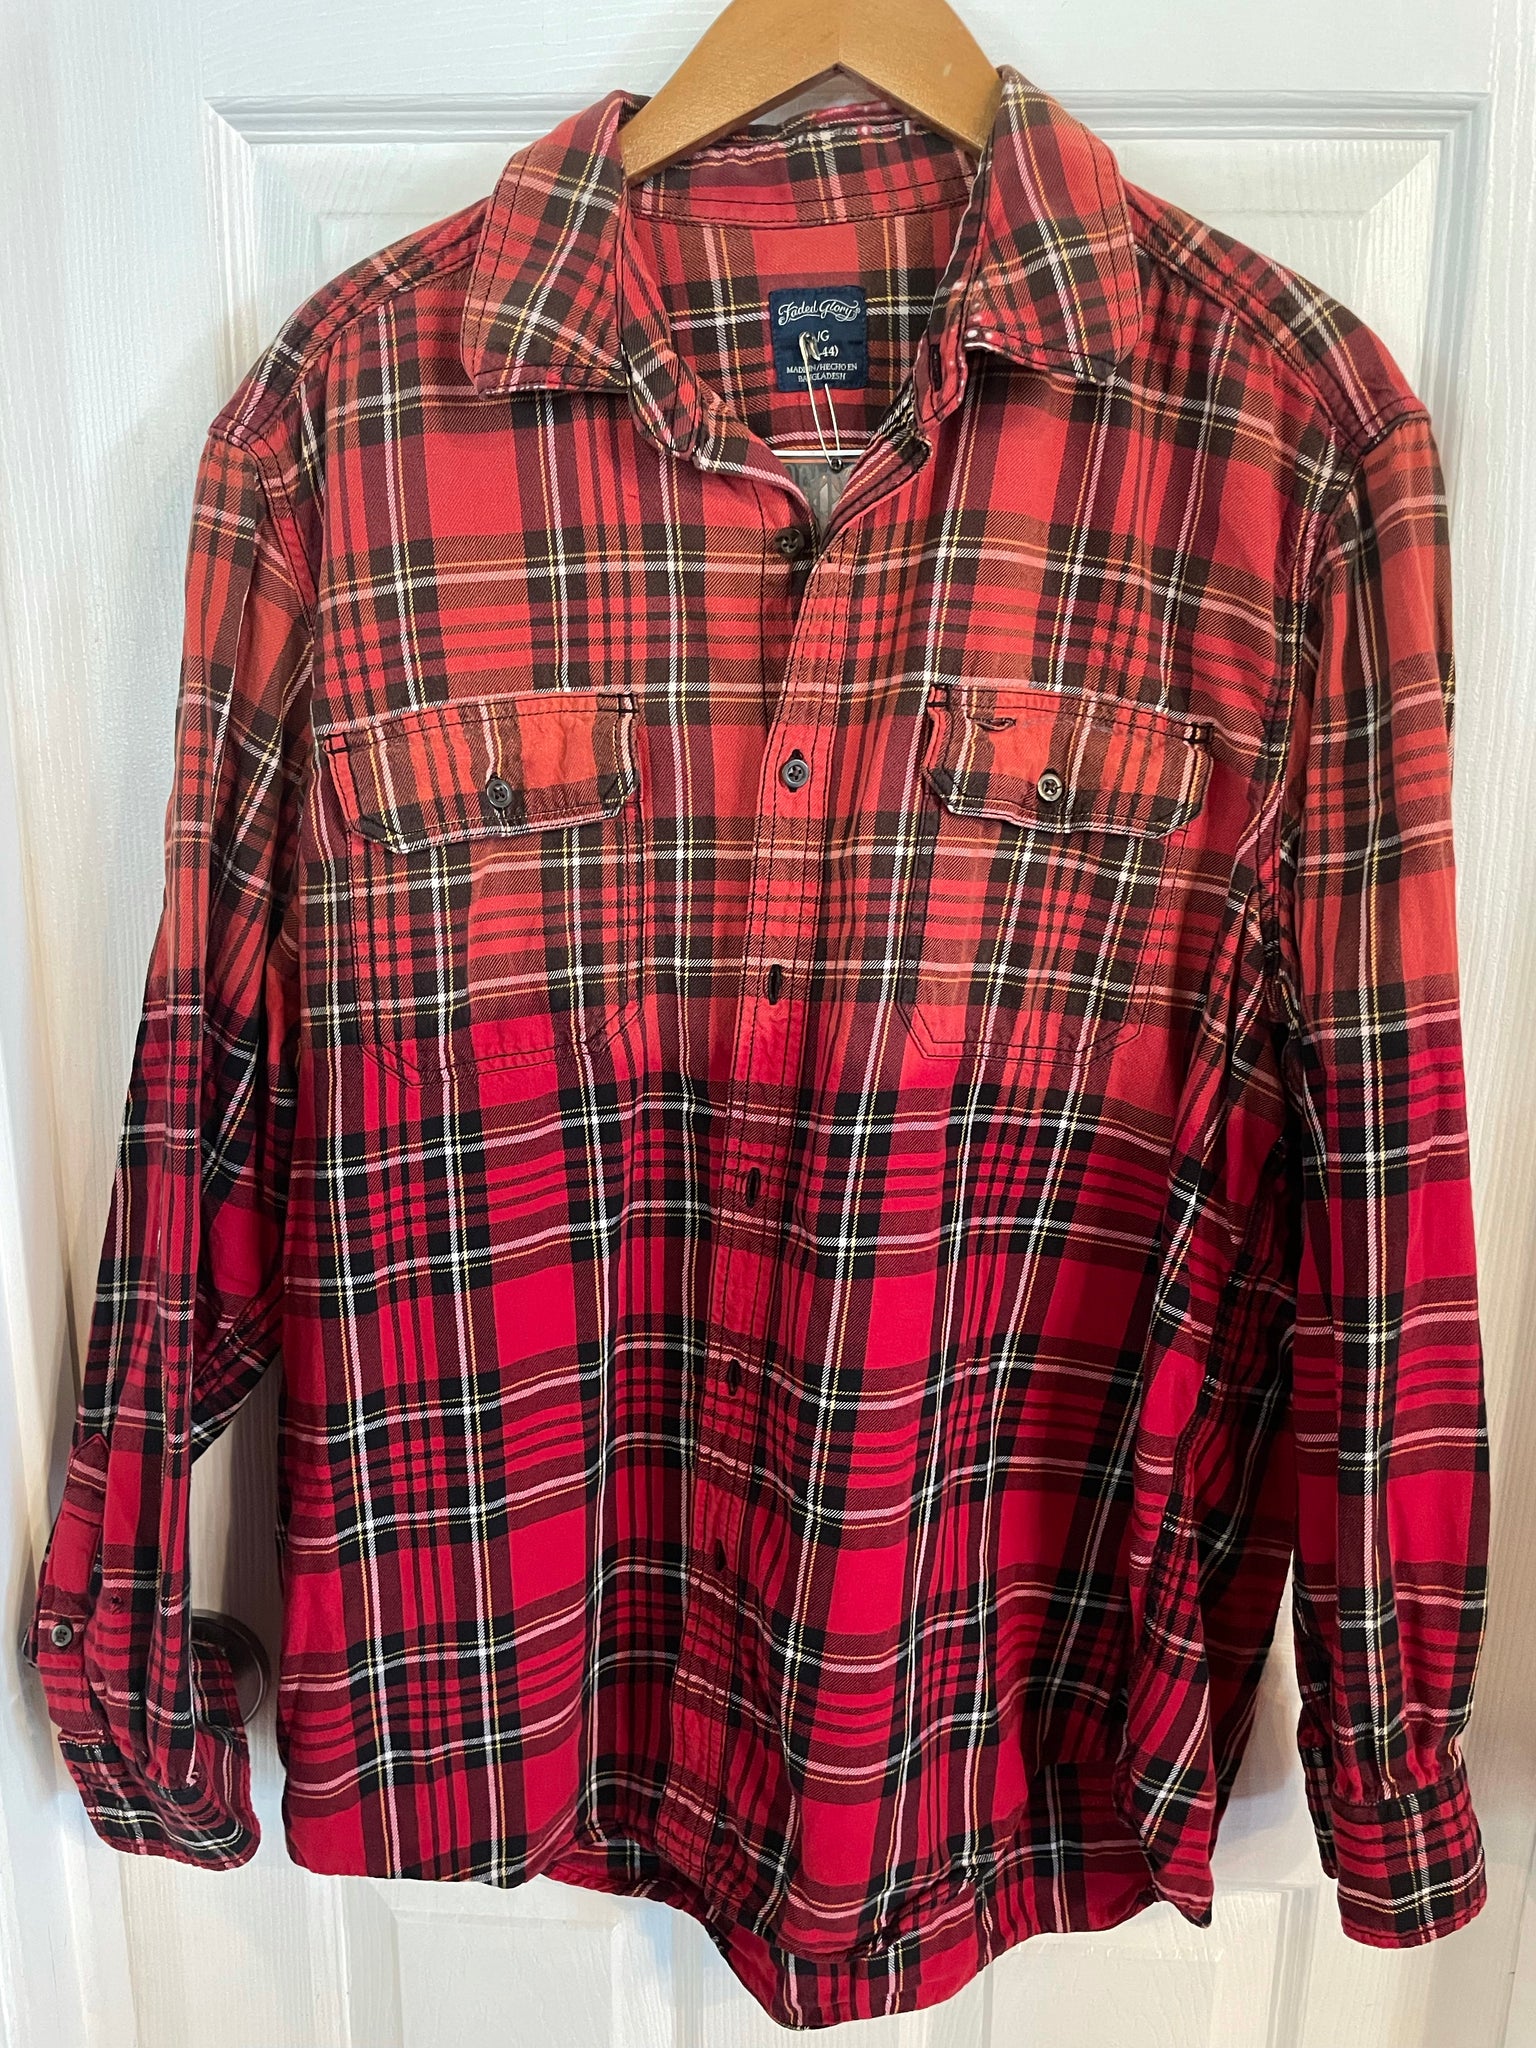 Cold Moon Collective Flannel - Red/Black Checkers L